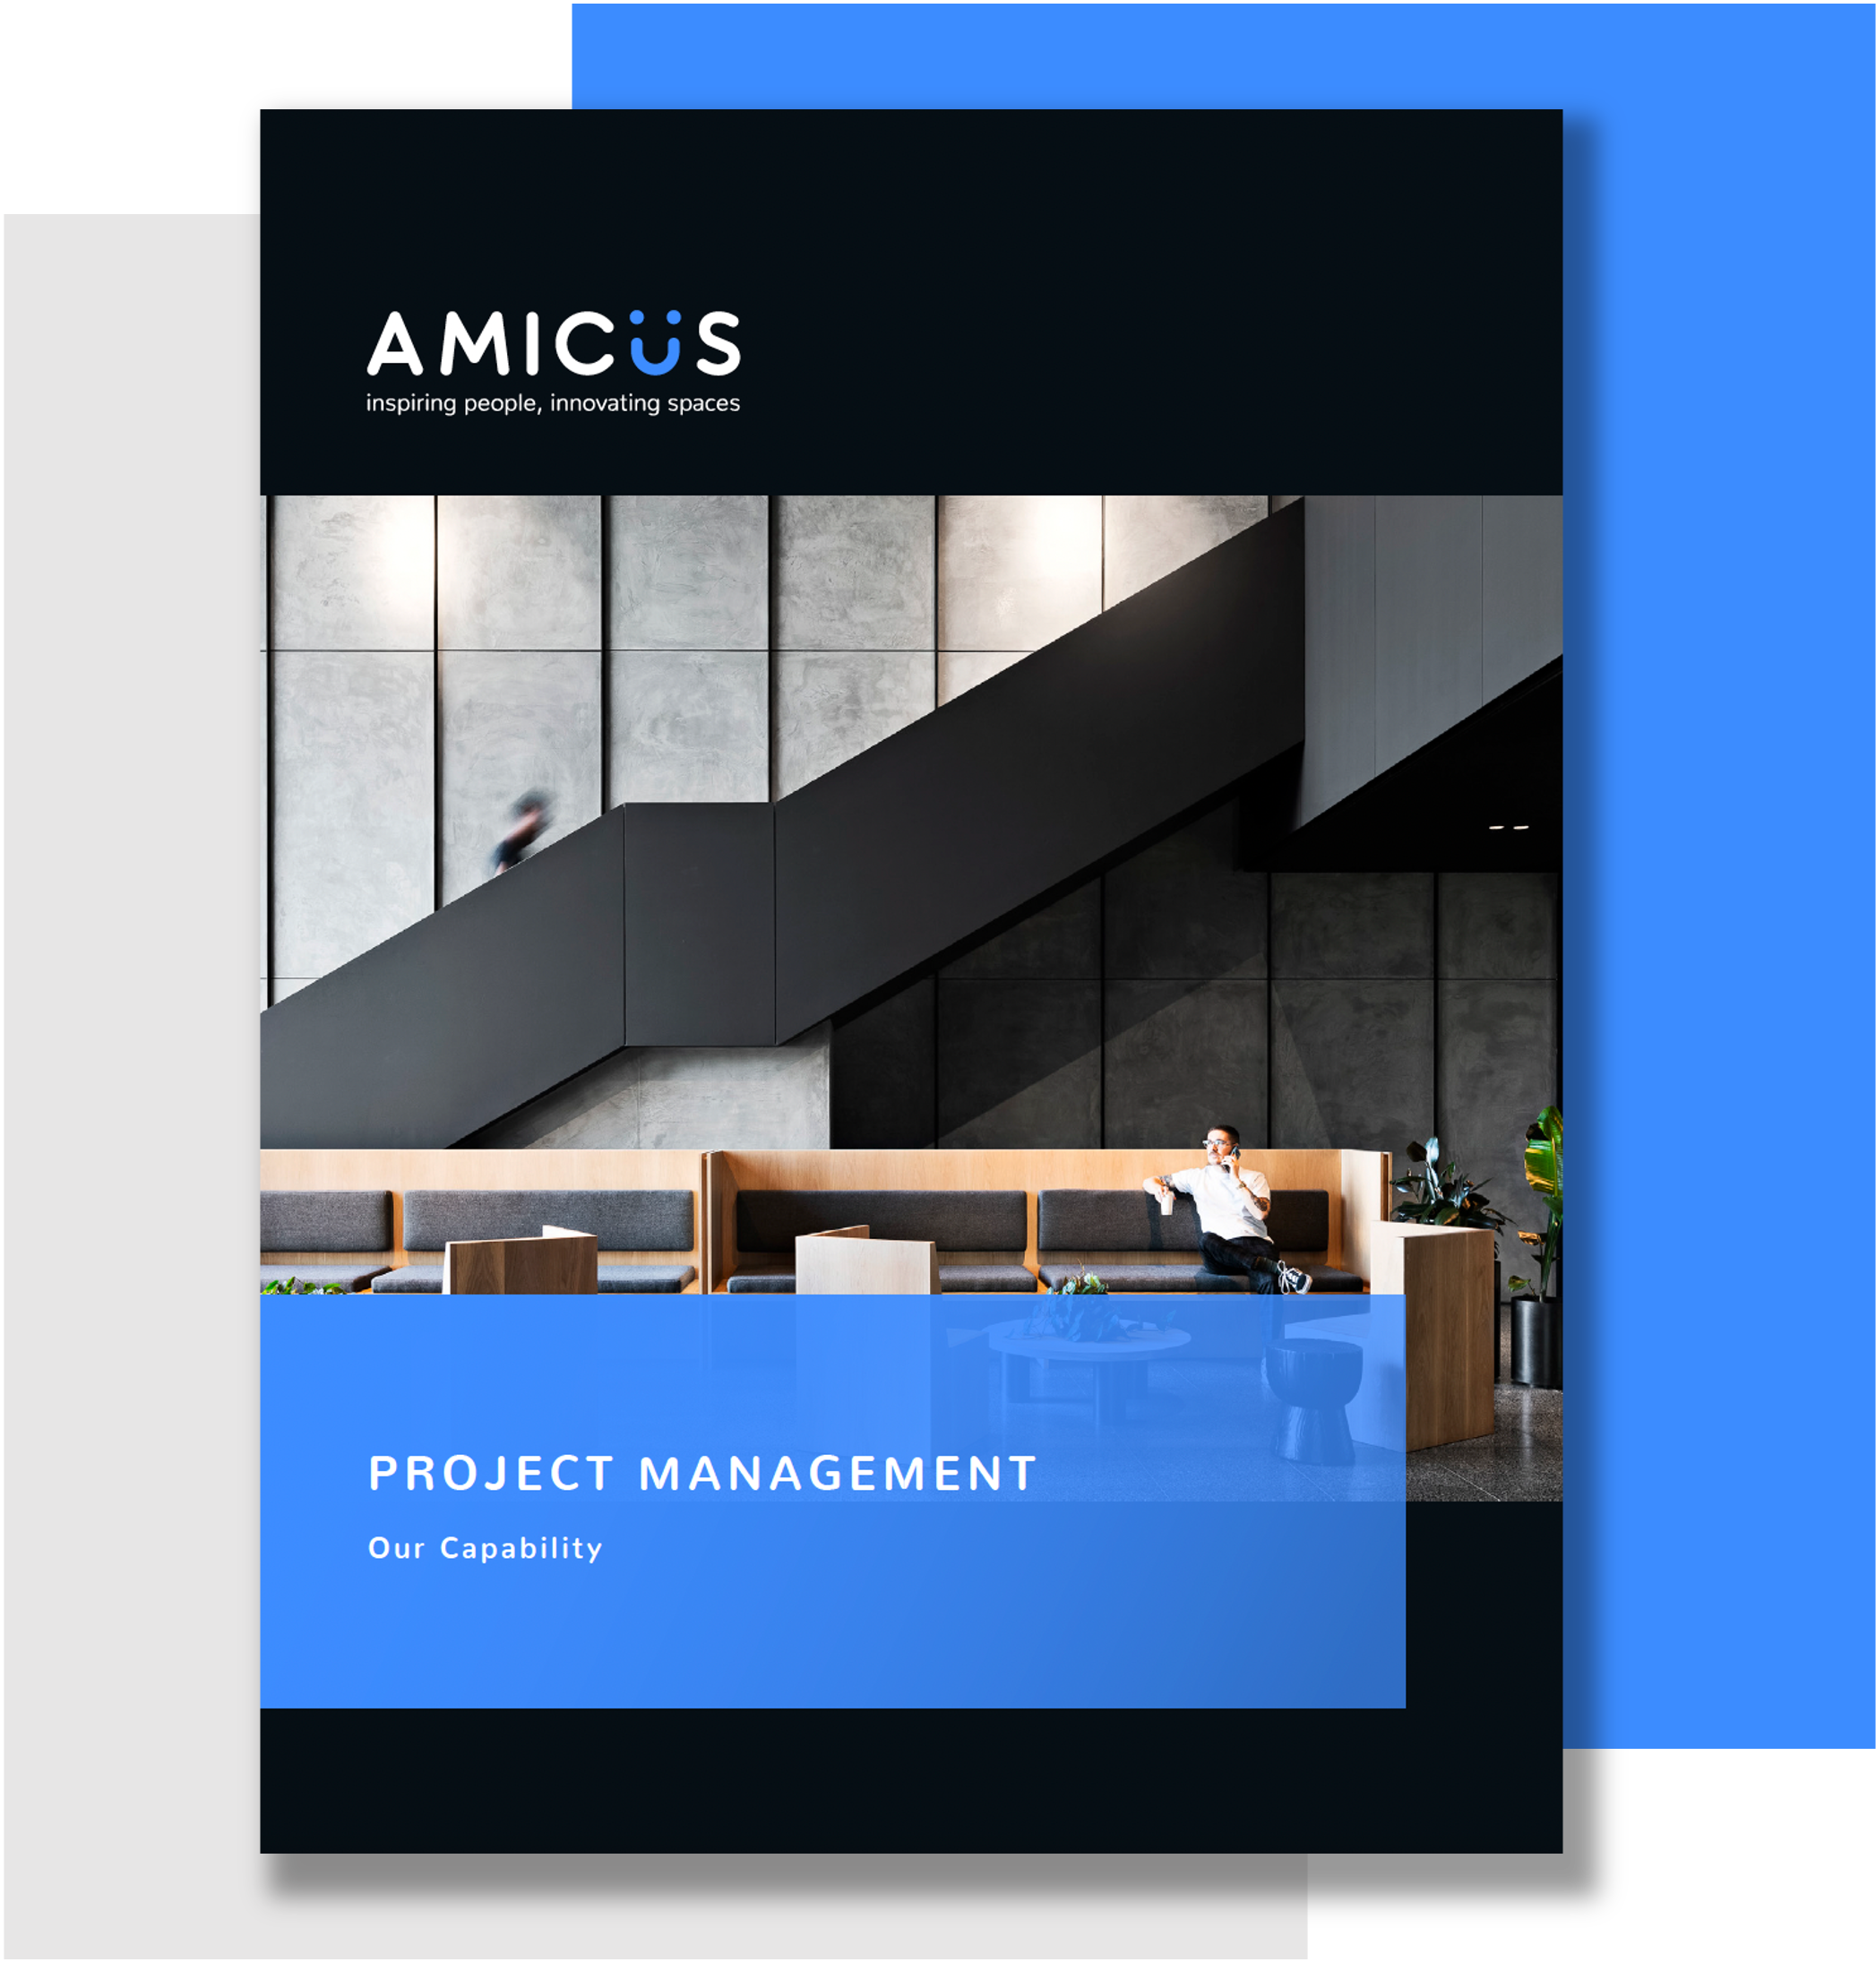 Project Management - Our Capability